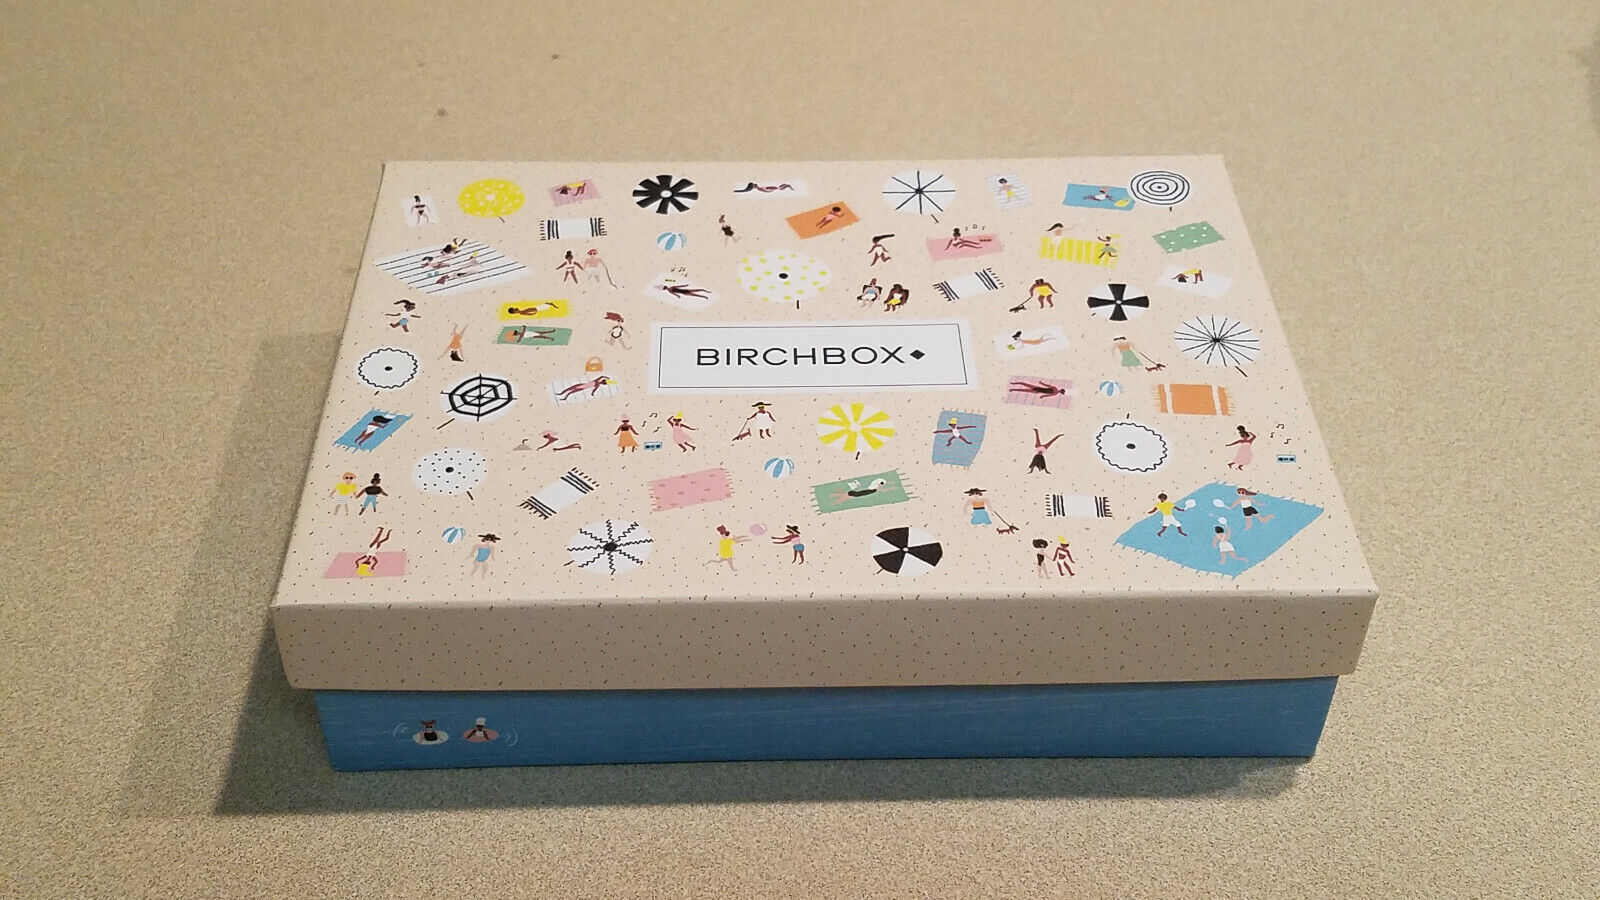 Primary image for BirchBox "Beach Babes" 7 1/4" x 5 1/4" Gift Box with Foam Insert